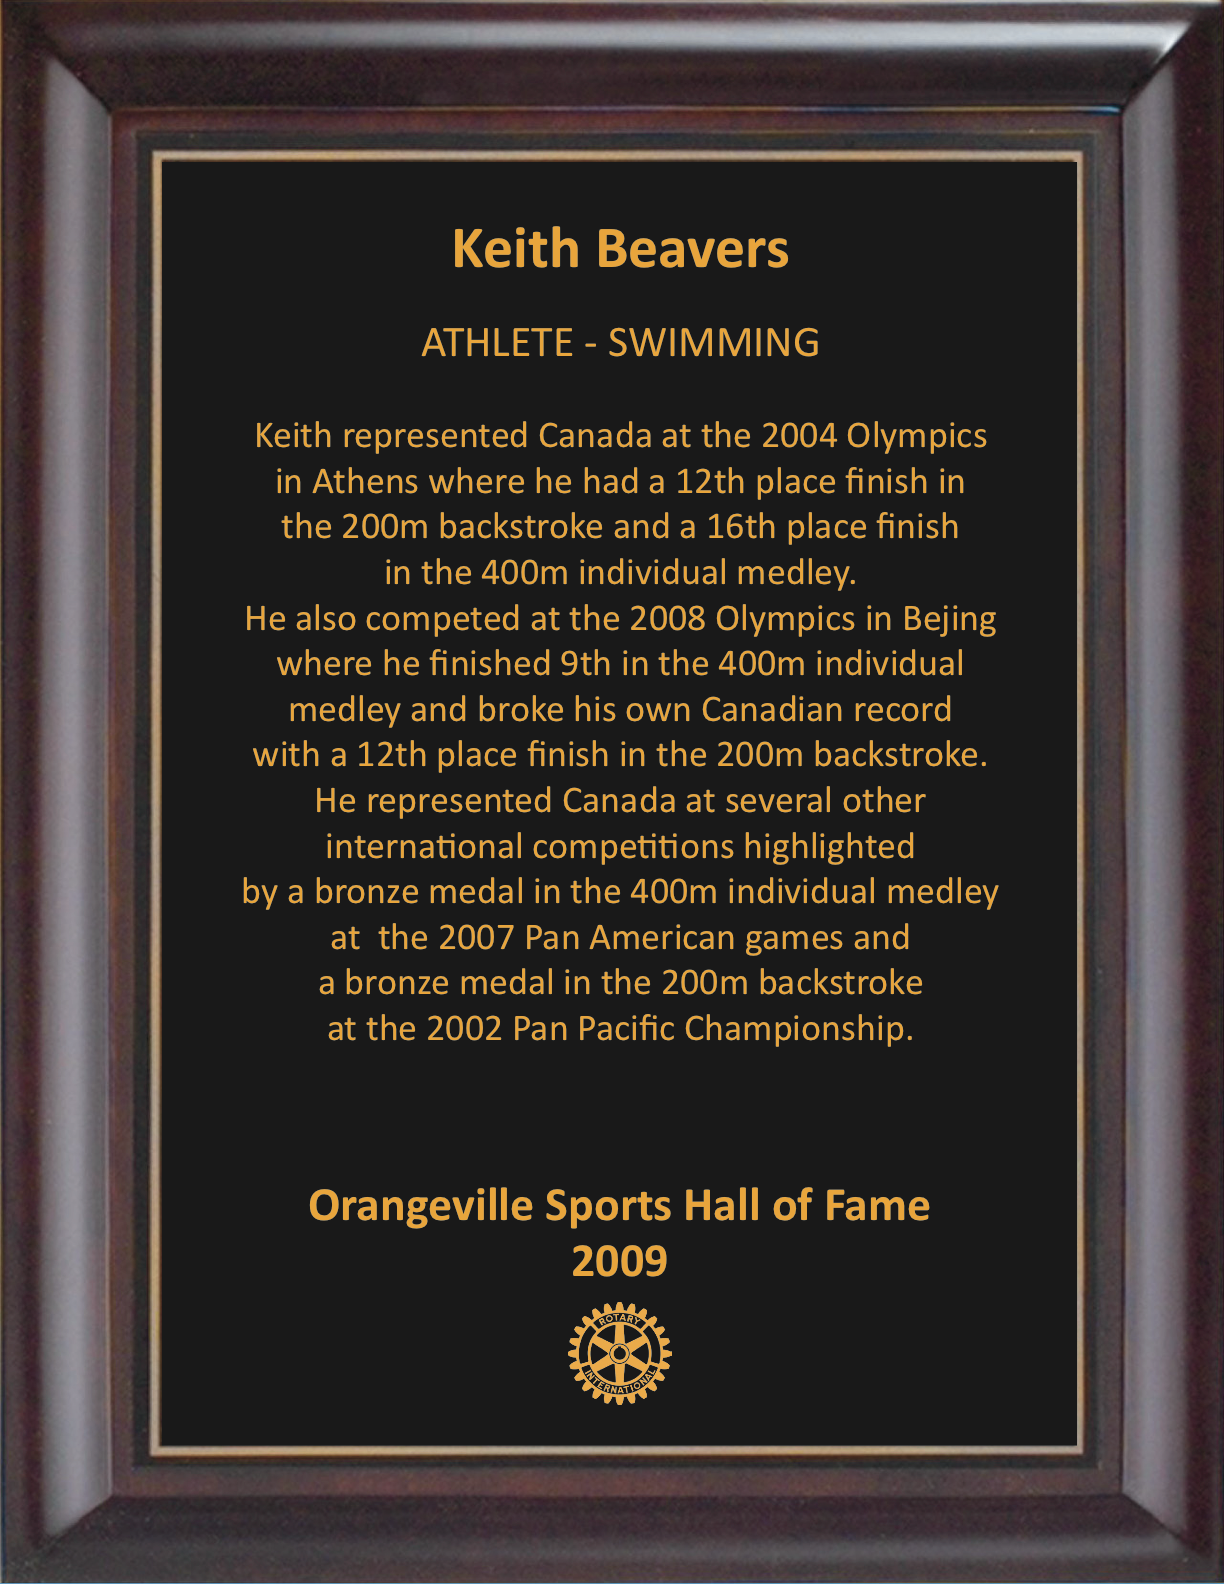 Keith Beavers 2009 Hall of Fame Plaque